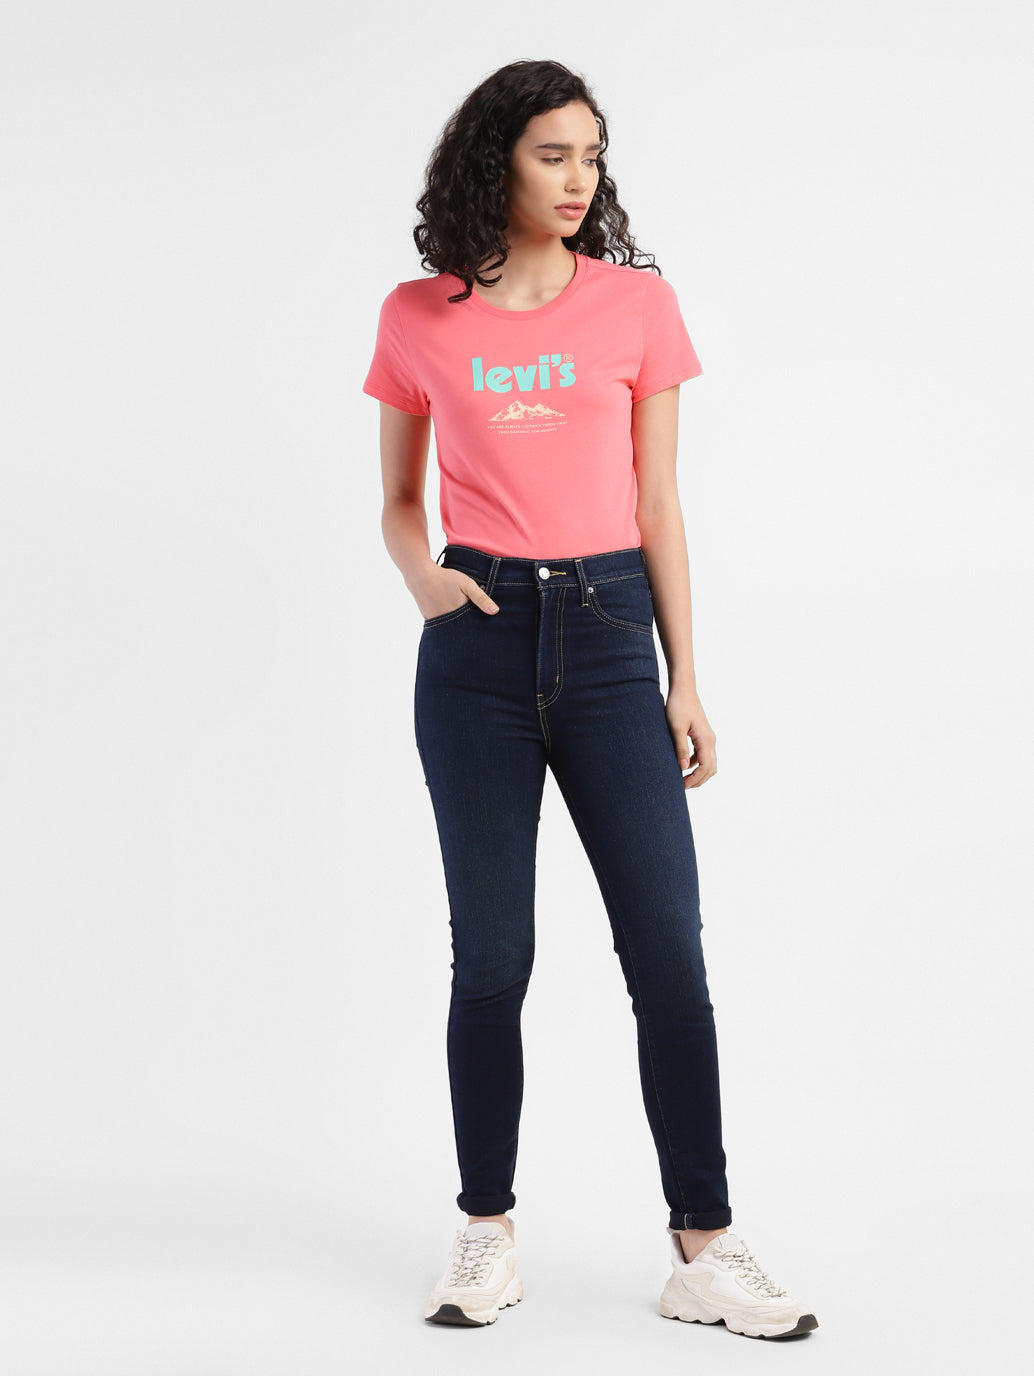 Shop Mile High Jeans for Women Online | Levi's India – Levis India Store